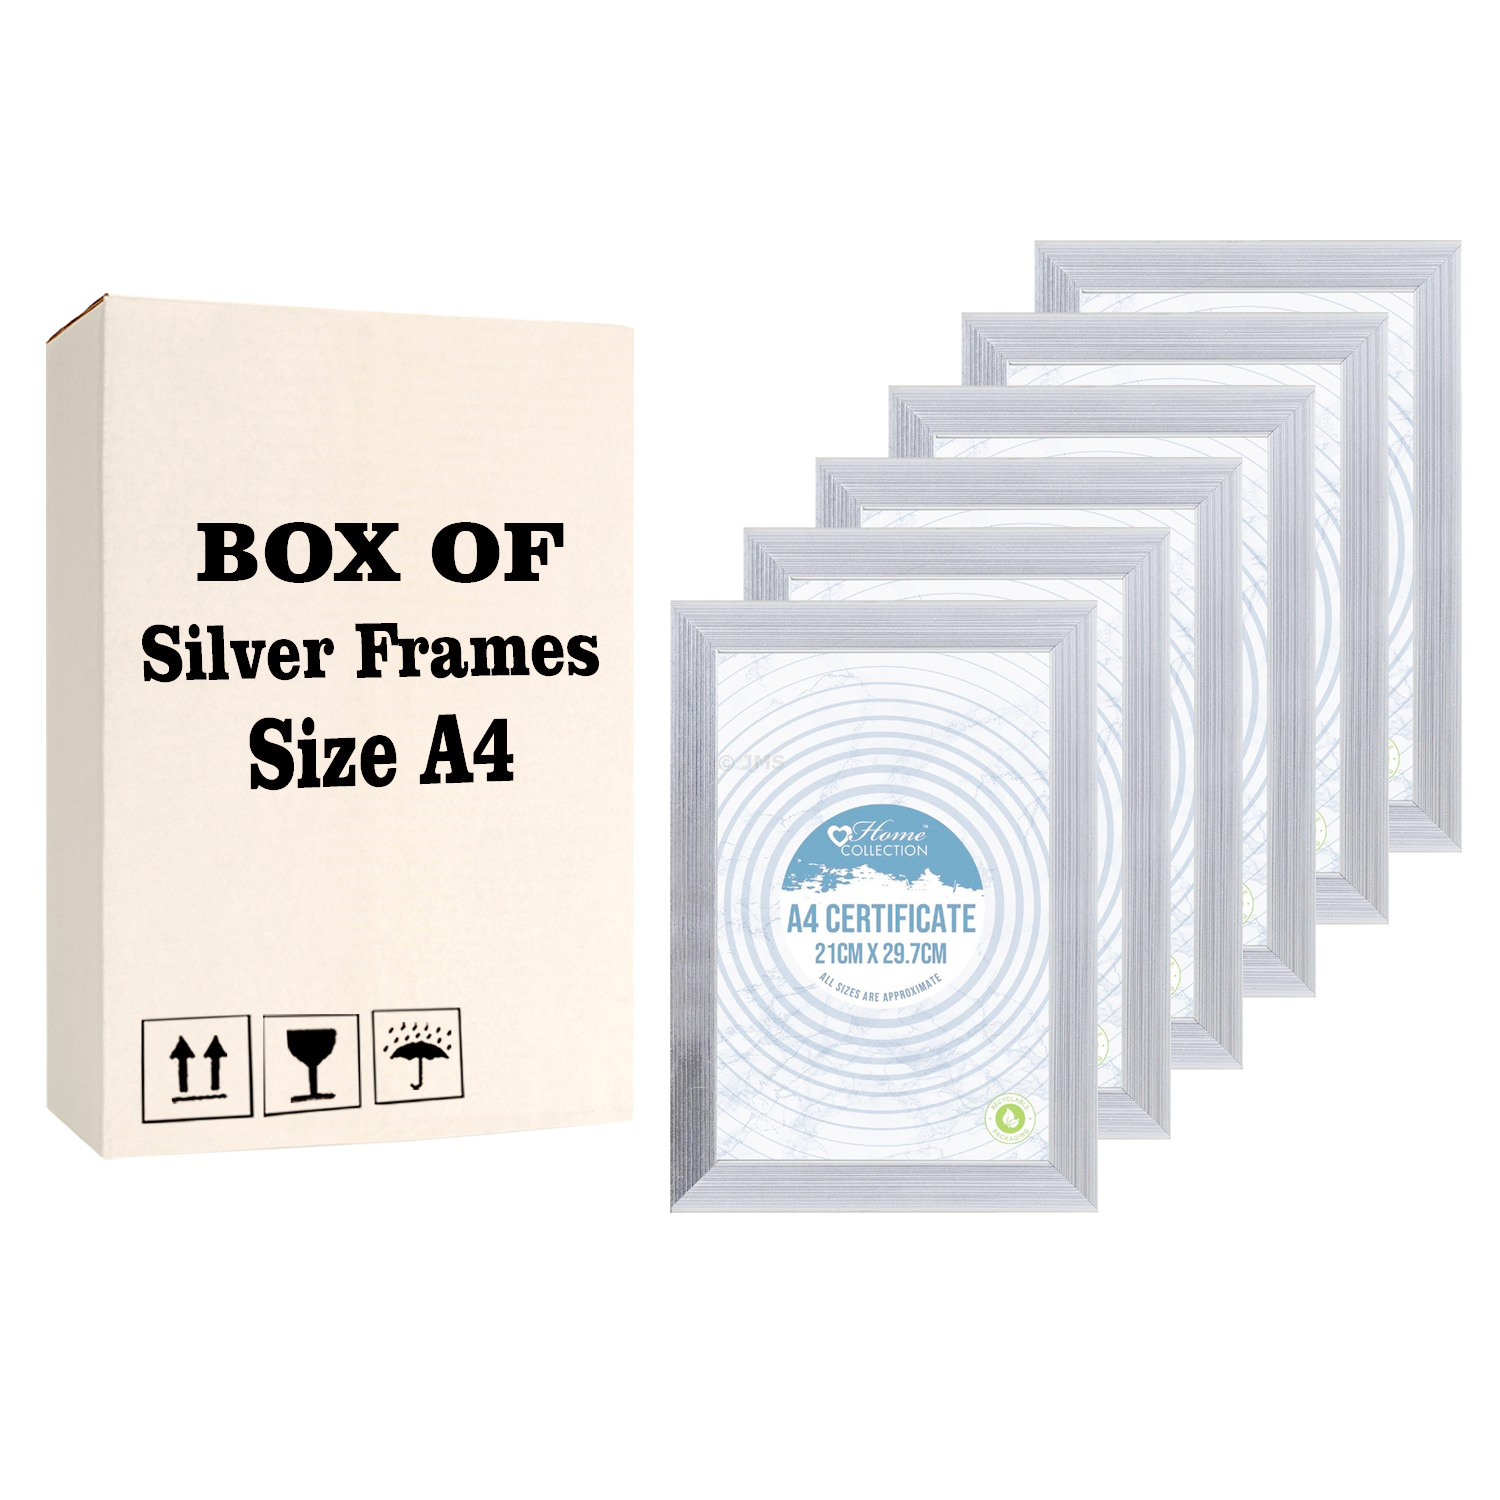 Box of 24 Silver Photo Picture Frame A4 (21 x 29.7cm) Certificate Frames Cambridge Glass Wall Mountable Portrait Poster Puzzle Art Print